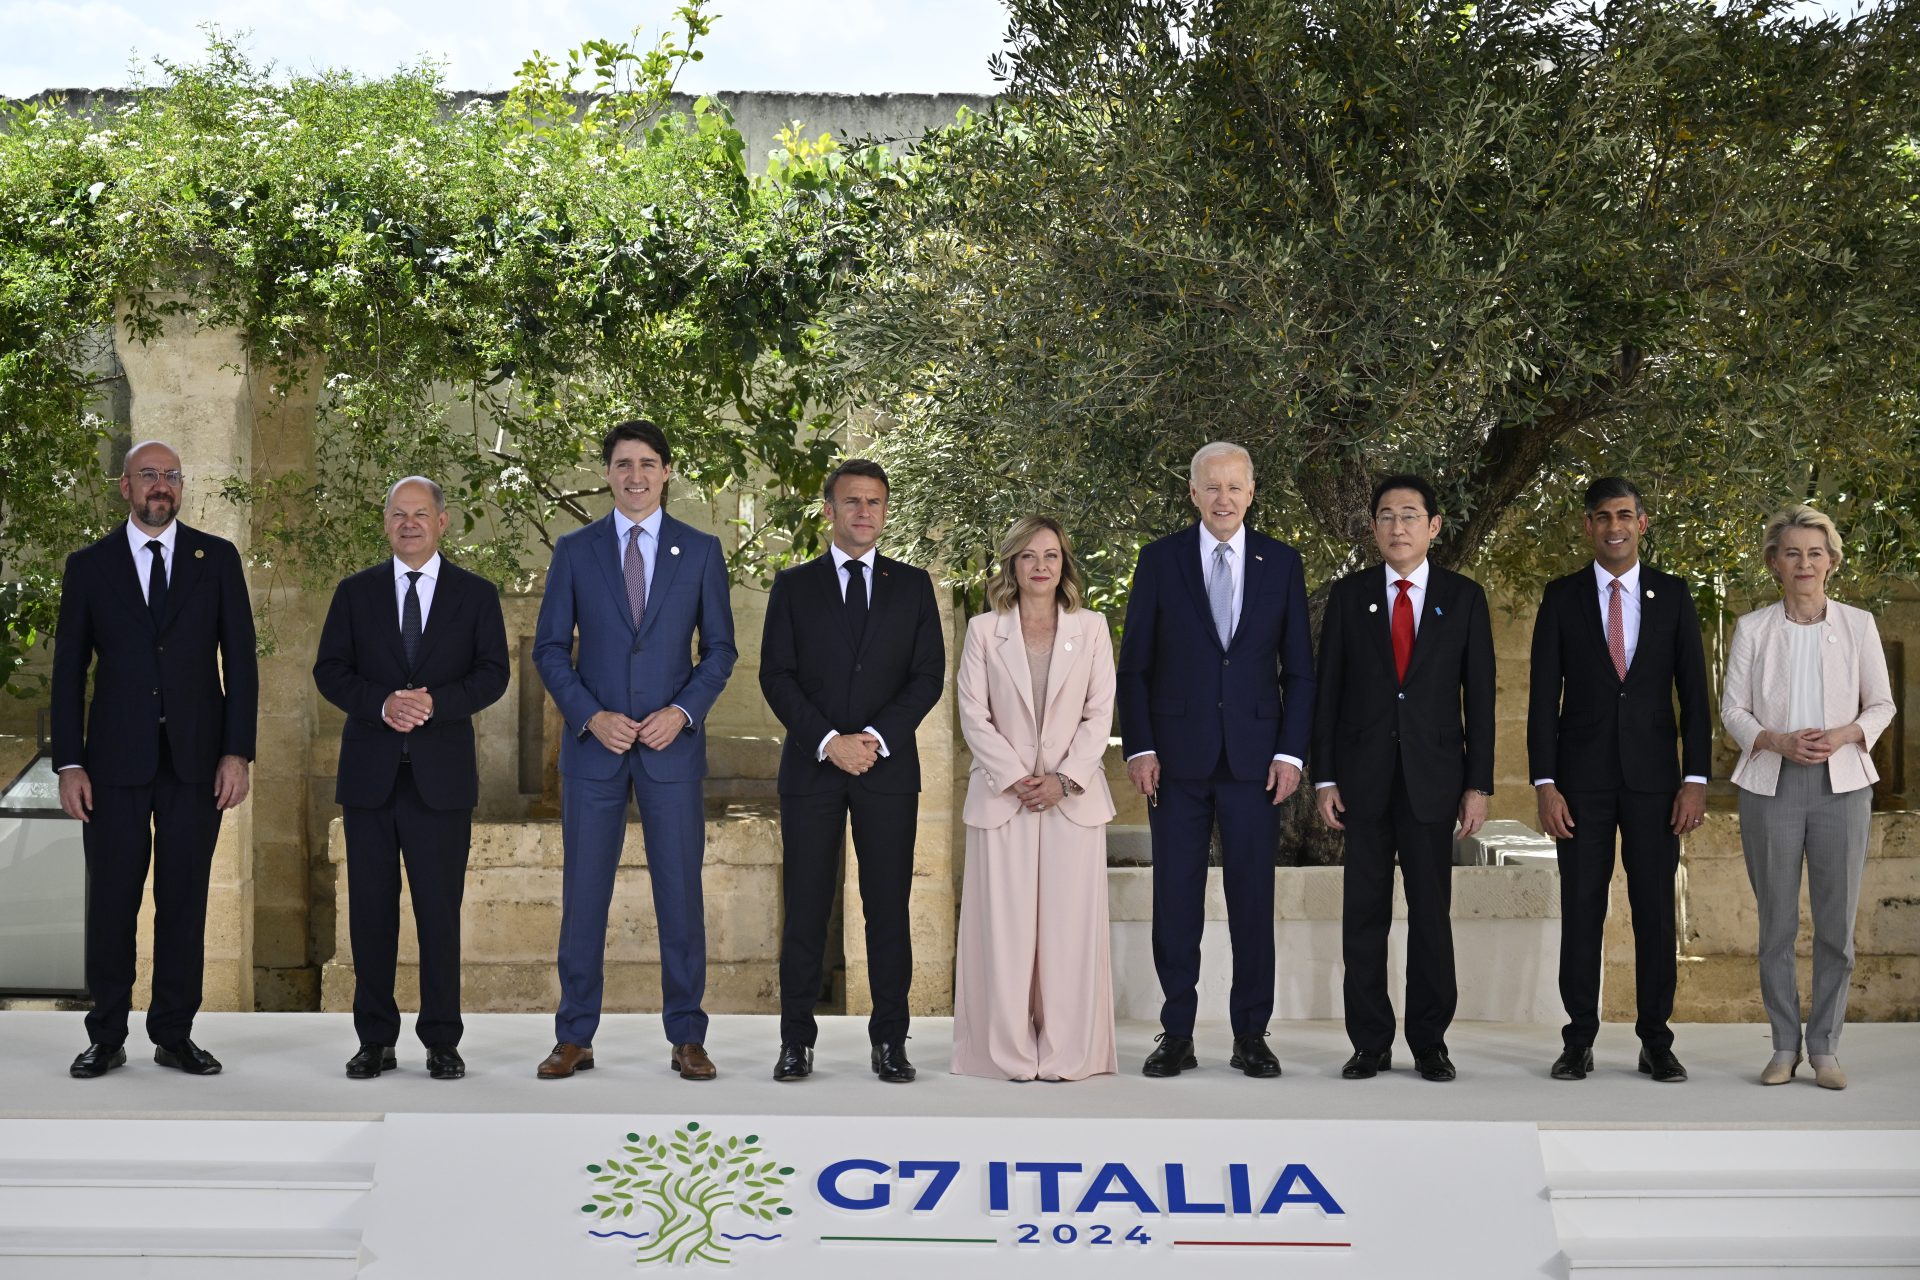 The G7 effect